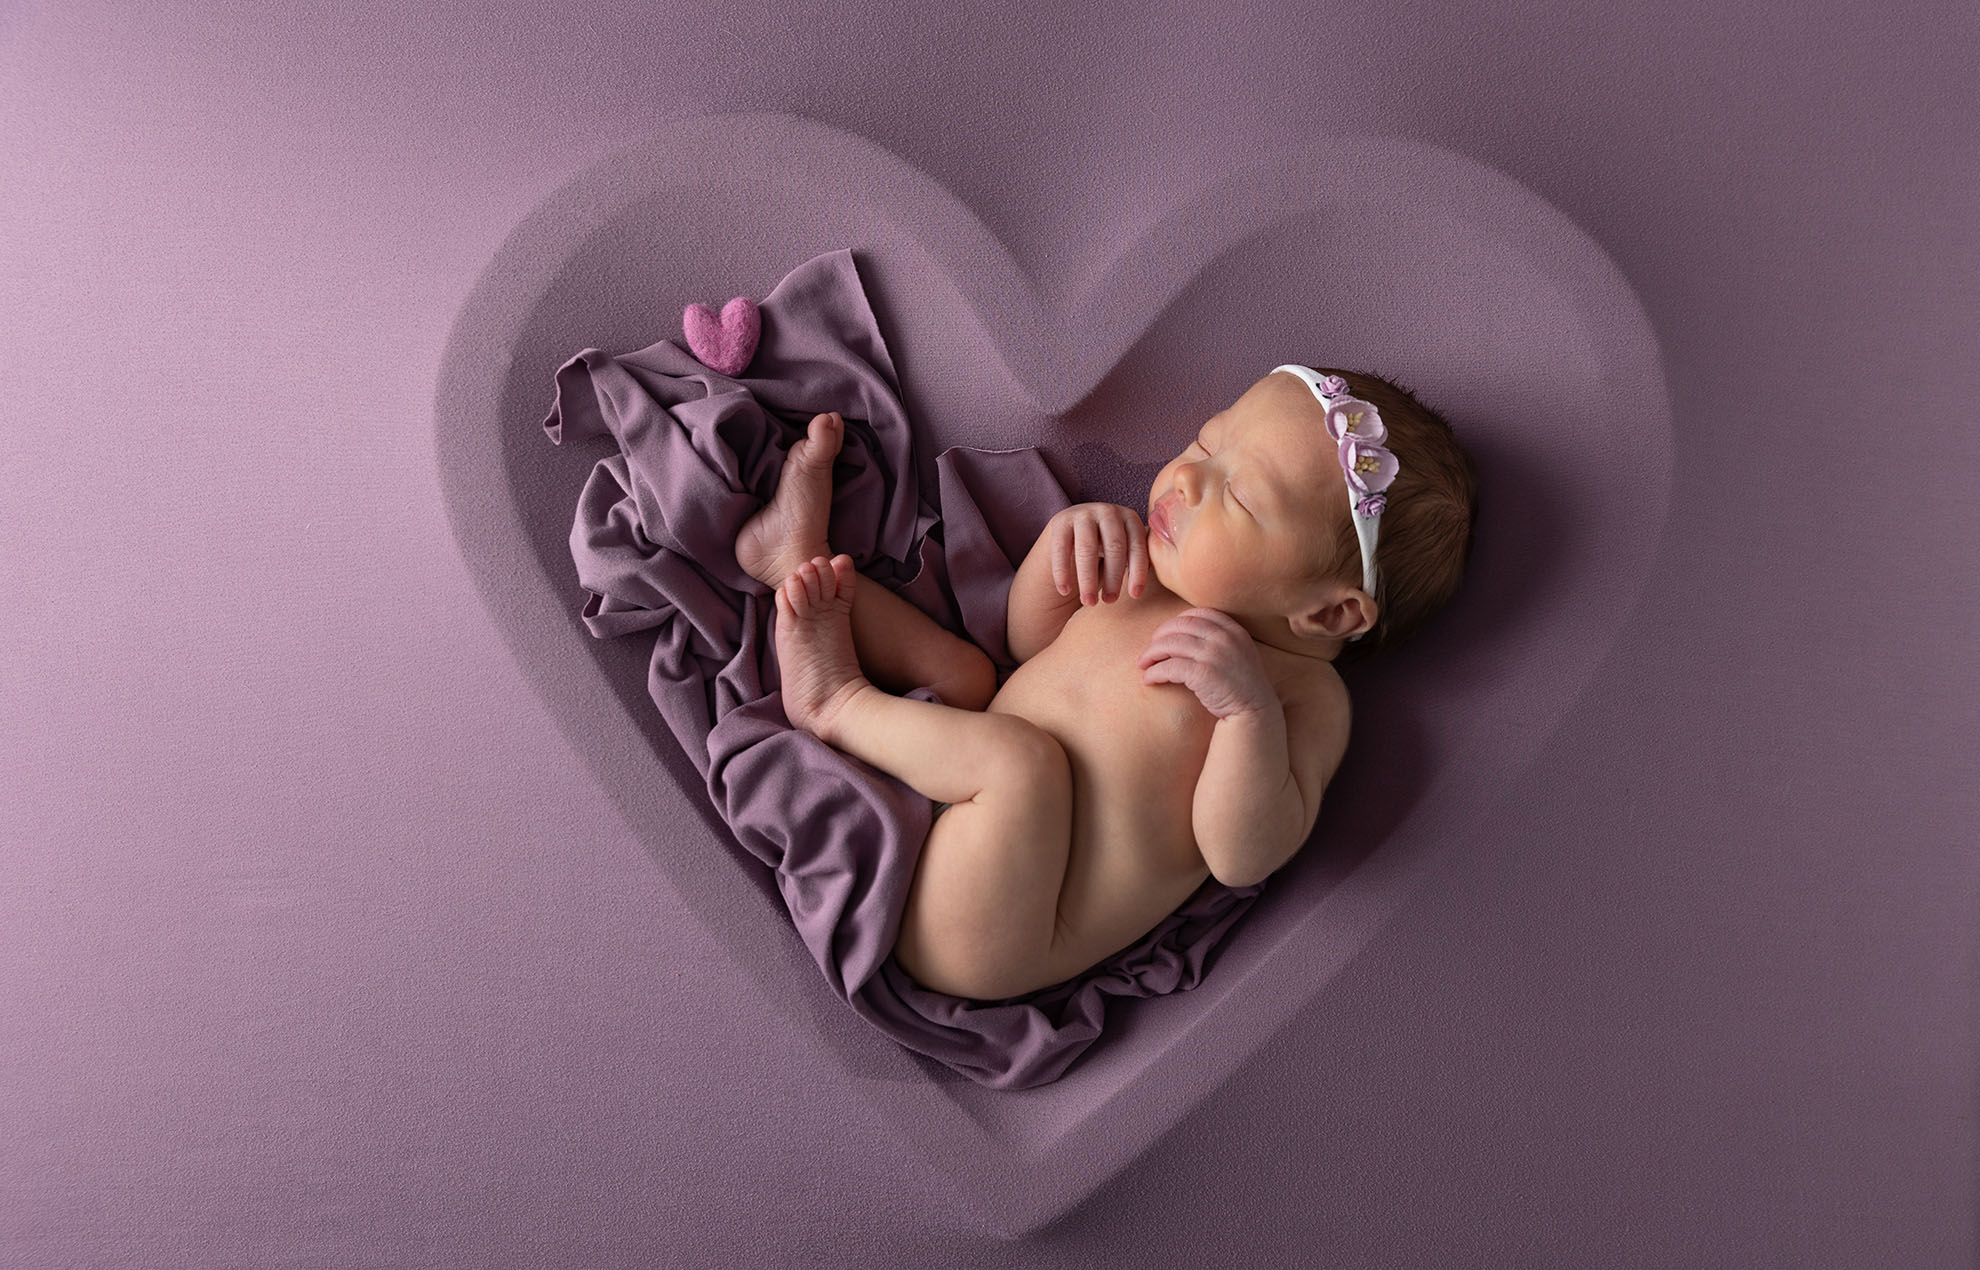 Newborn Photoshoots: Why Are They So Expensive?